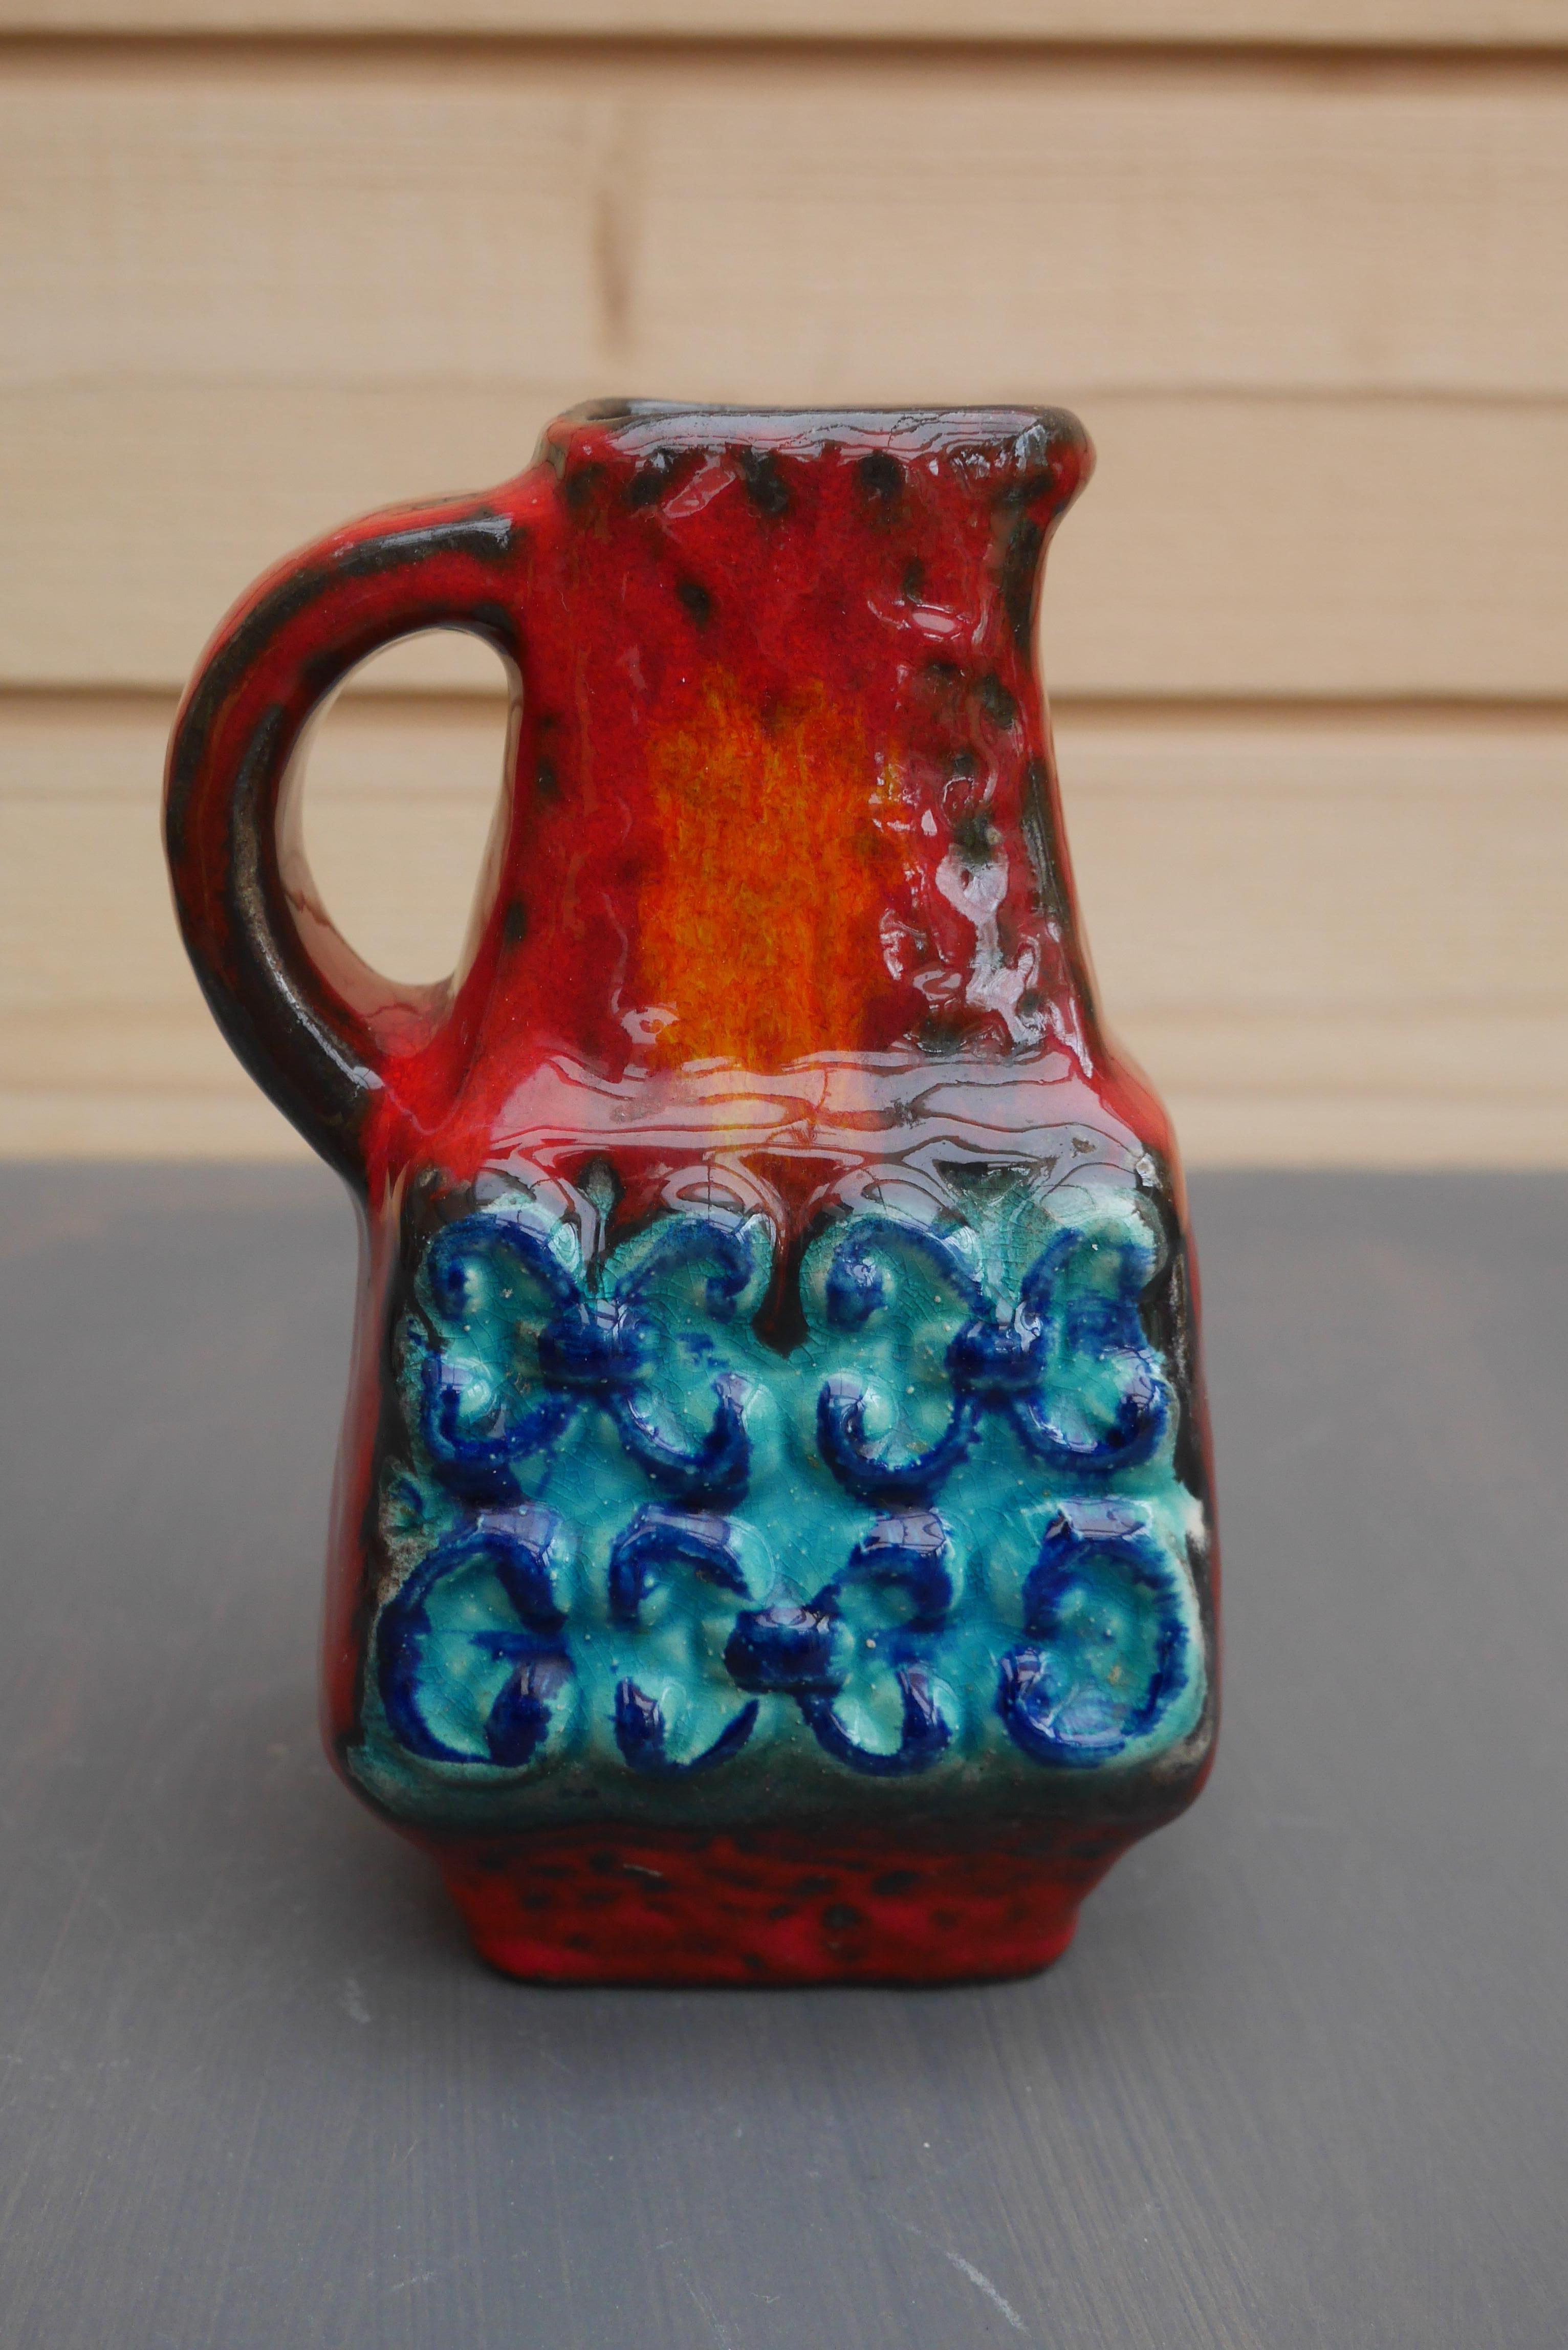 Fantastic small pitcher or vase from Bay Ceramics, West Germany. Very colorful orange and red glazing with turquoise highlights on the textured lower part. Marked with the model number 254/17.
Bay Keramik fabrik was founded by Eduard Bay in 1933 in